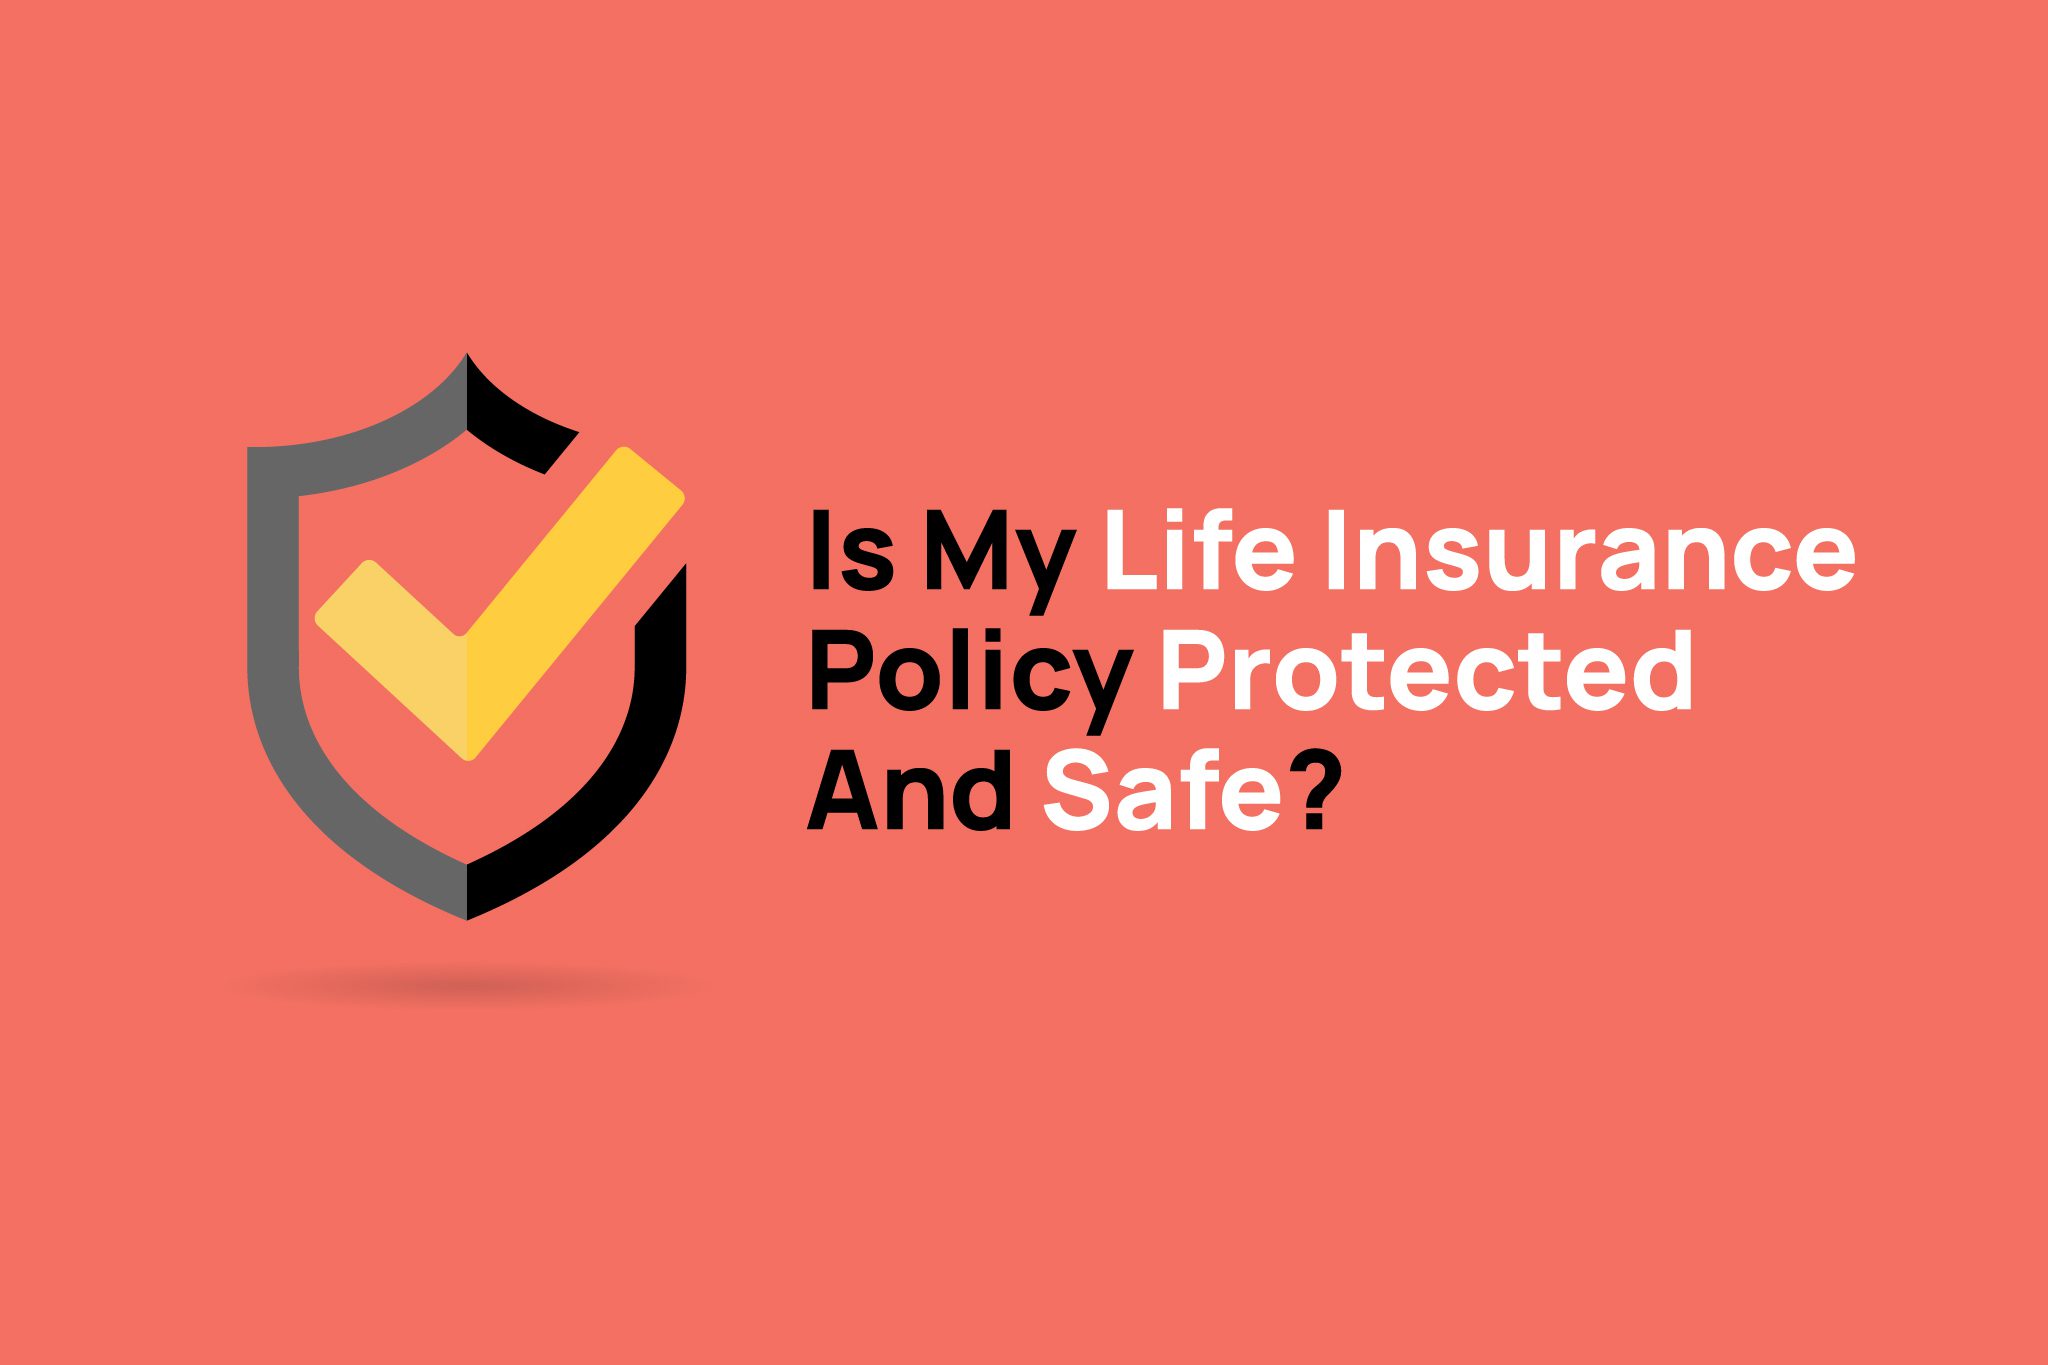 Is My Life Insurance Policy Protected And Safe?